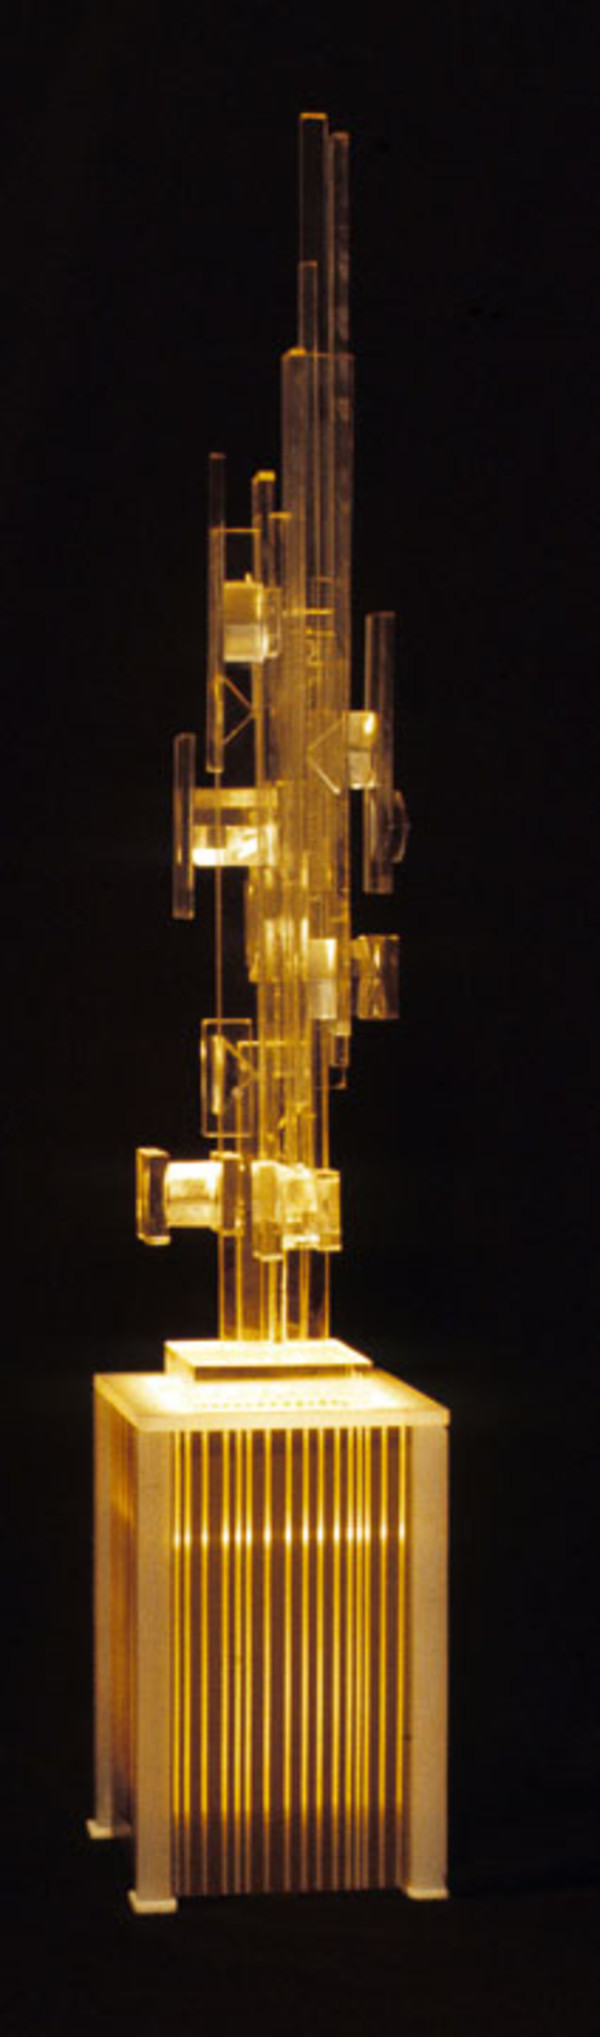 Acrylic Sculpture C by Irwin A. Whitaker